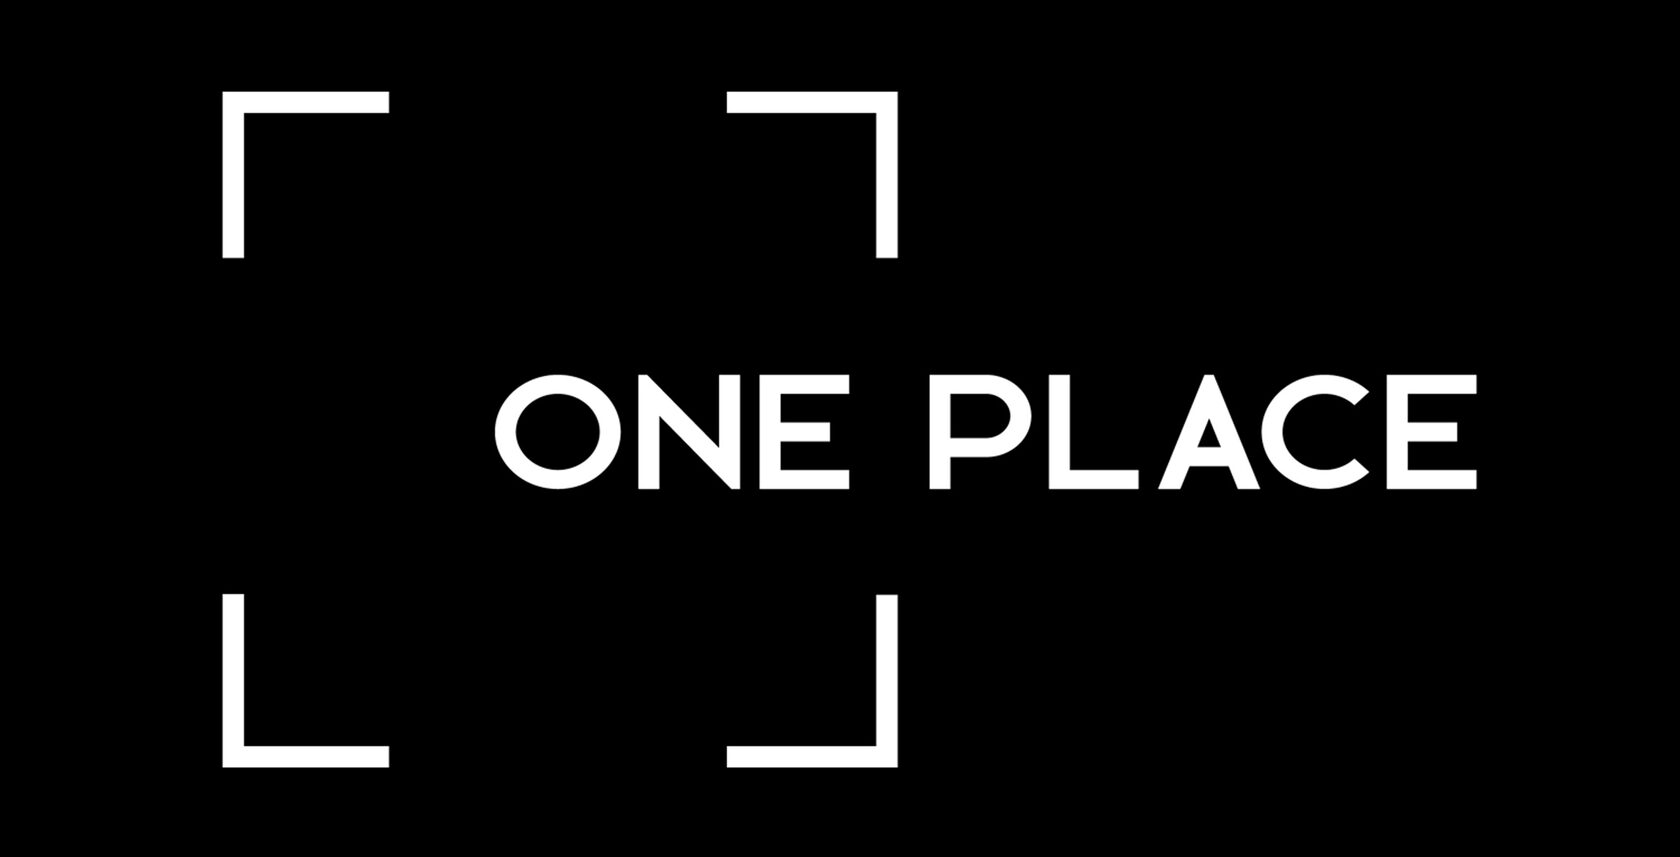 ONE PLACE